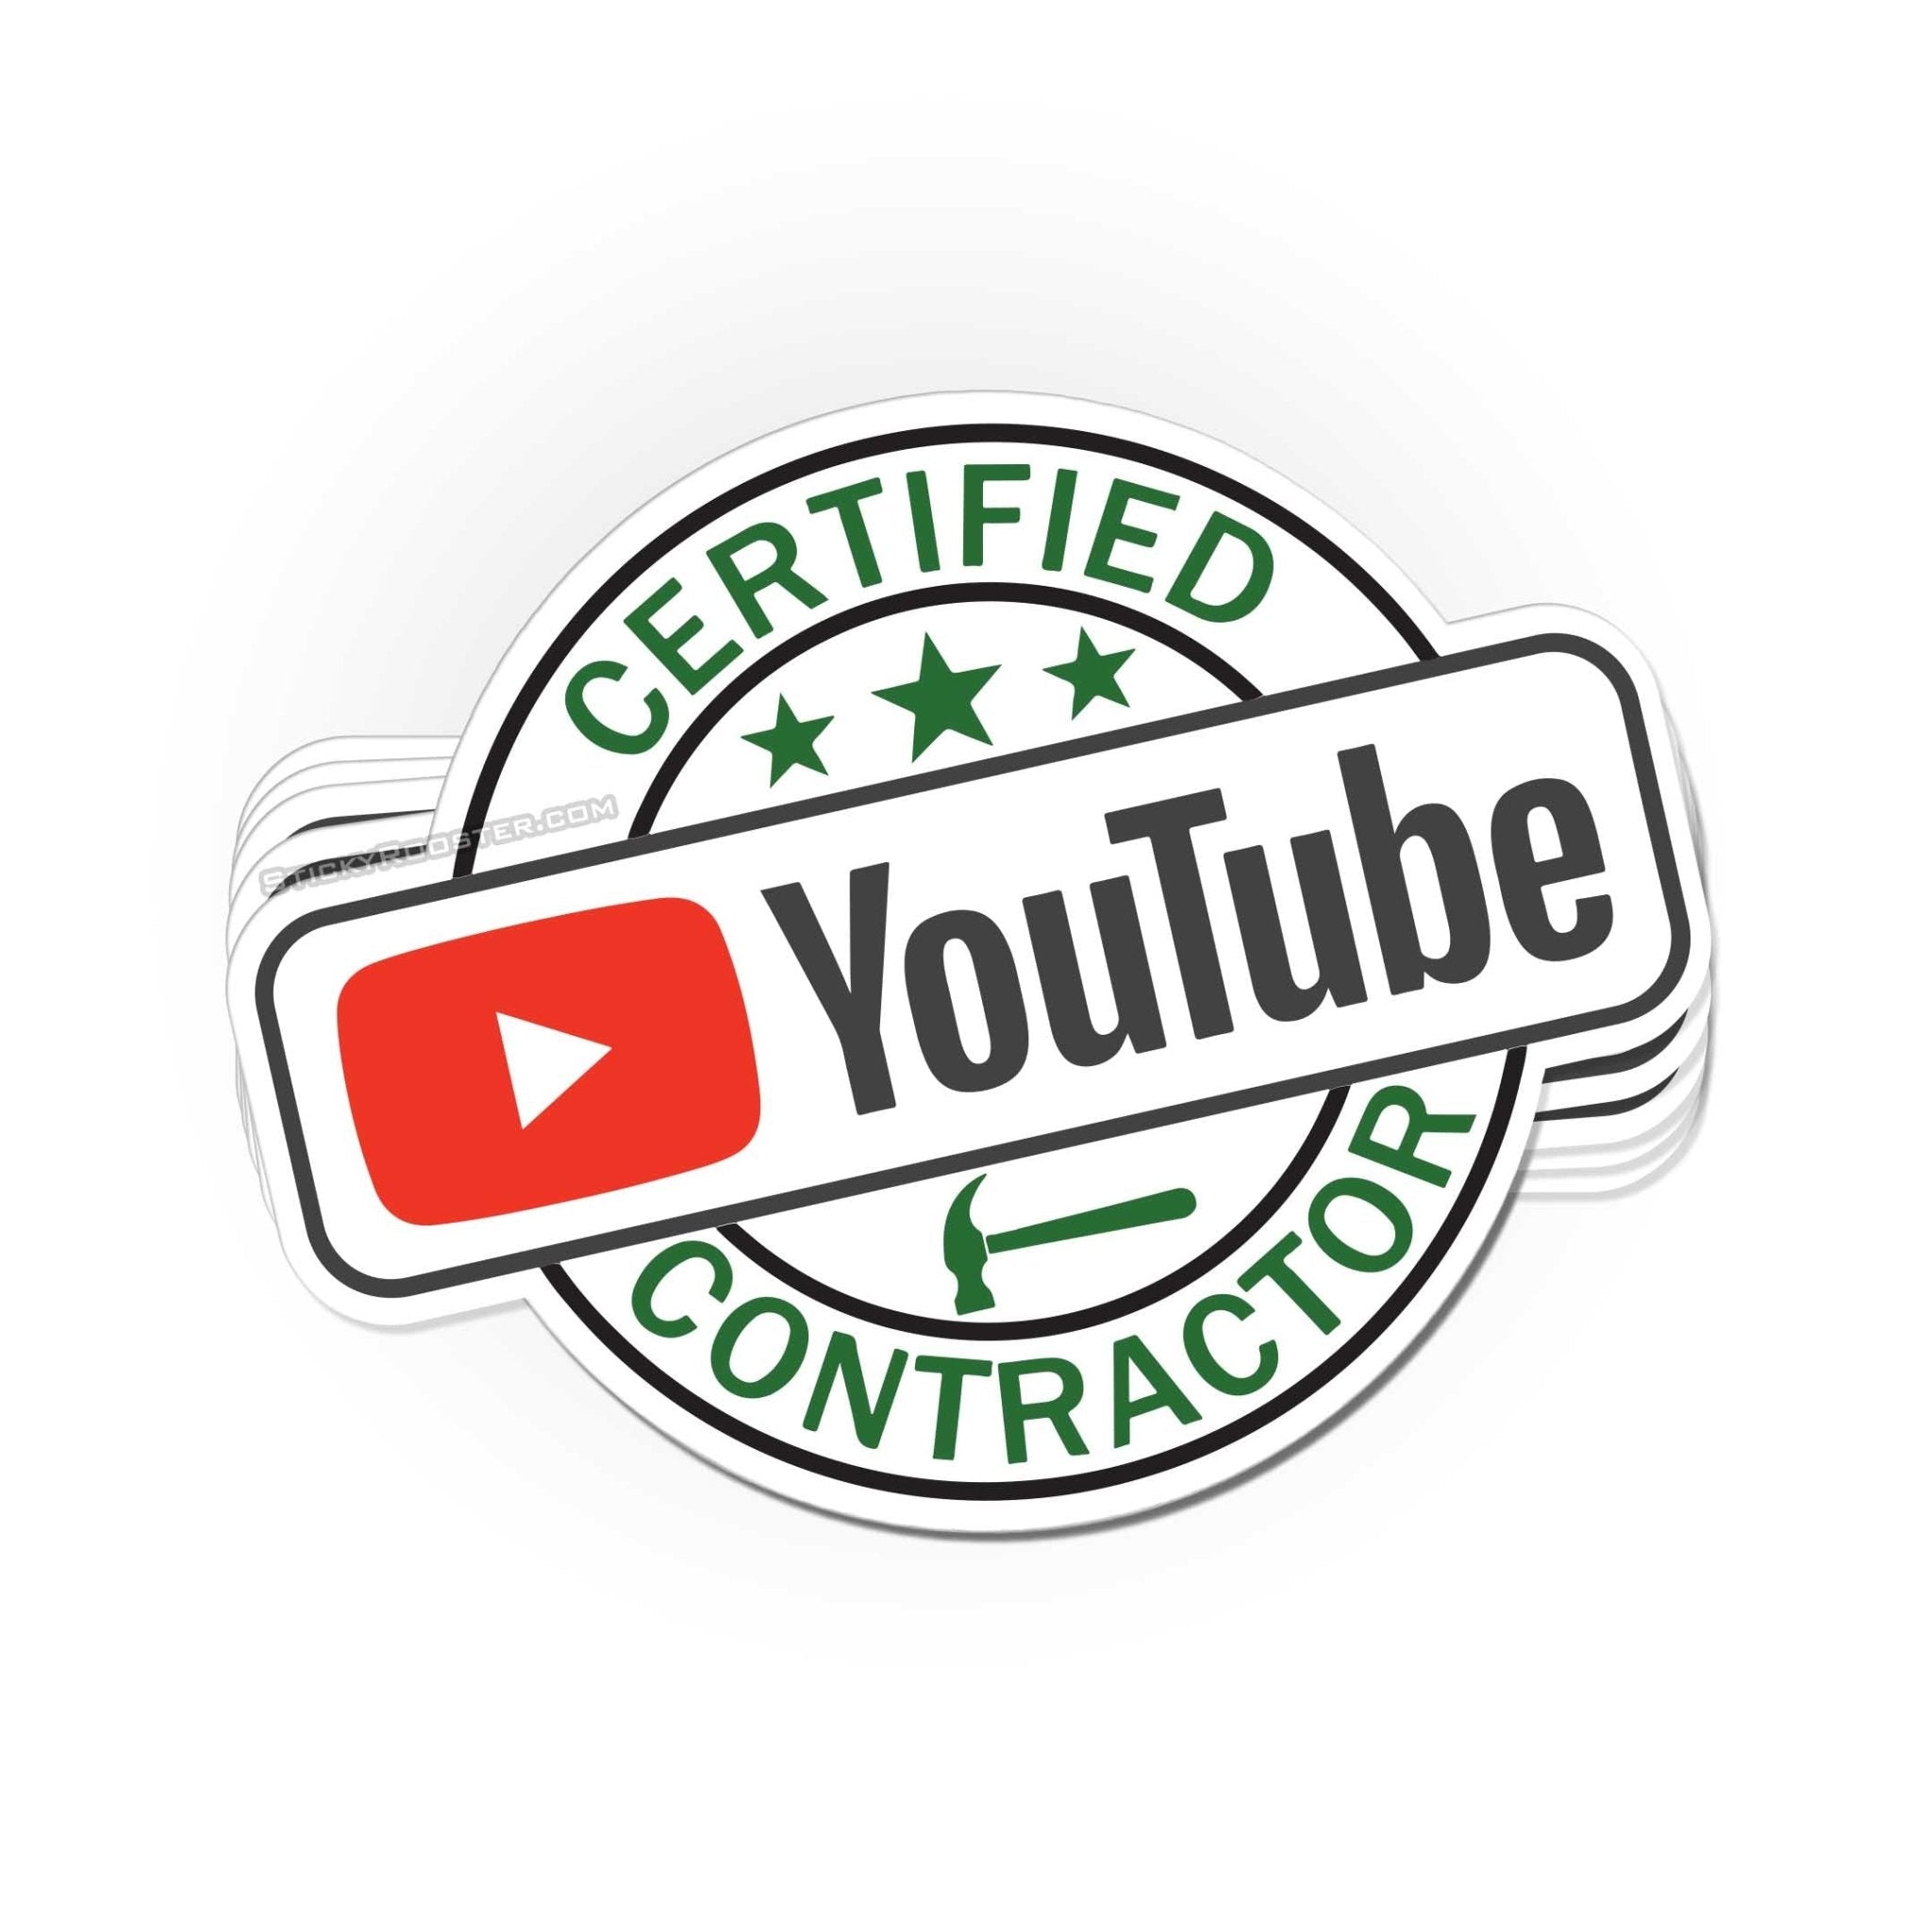 Youtube logo sticker on pattern printed on paper with small youtube logos  and inscriptions. YouTube is Google subsidiary and American most popular  video-sharing platform 31235639 Stock Photo at Vecteezy